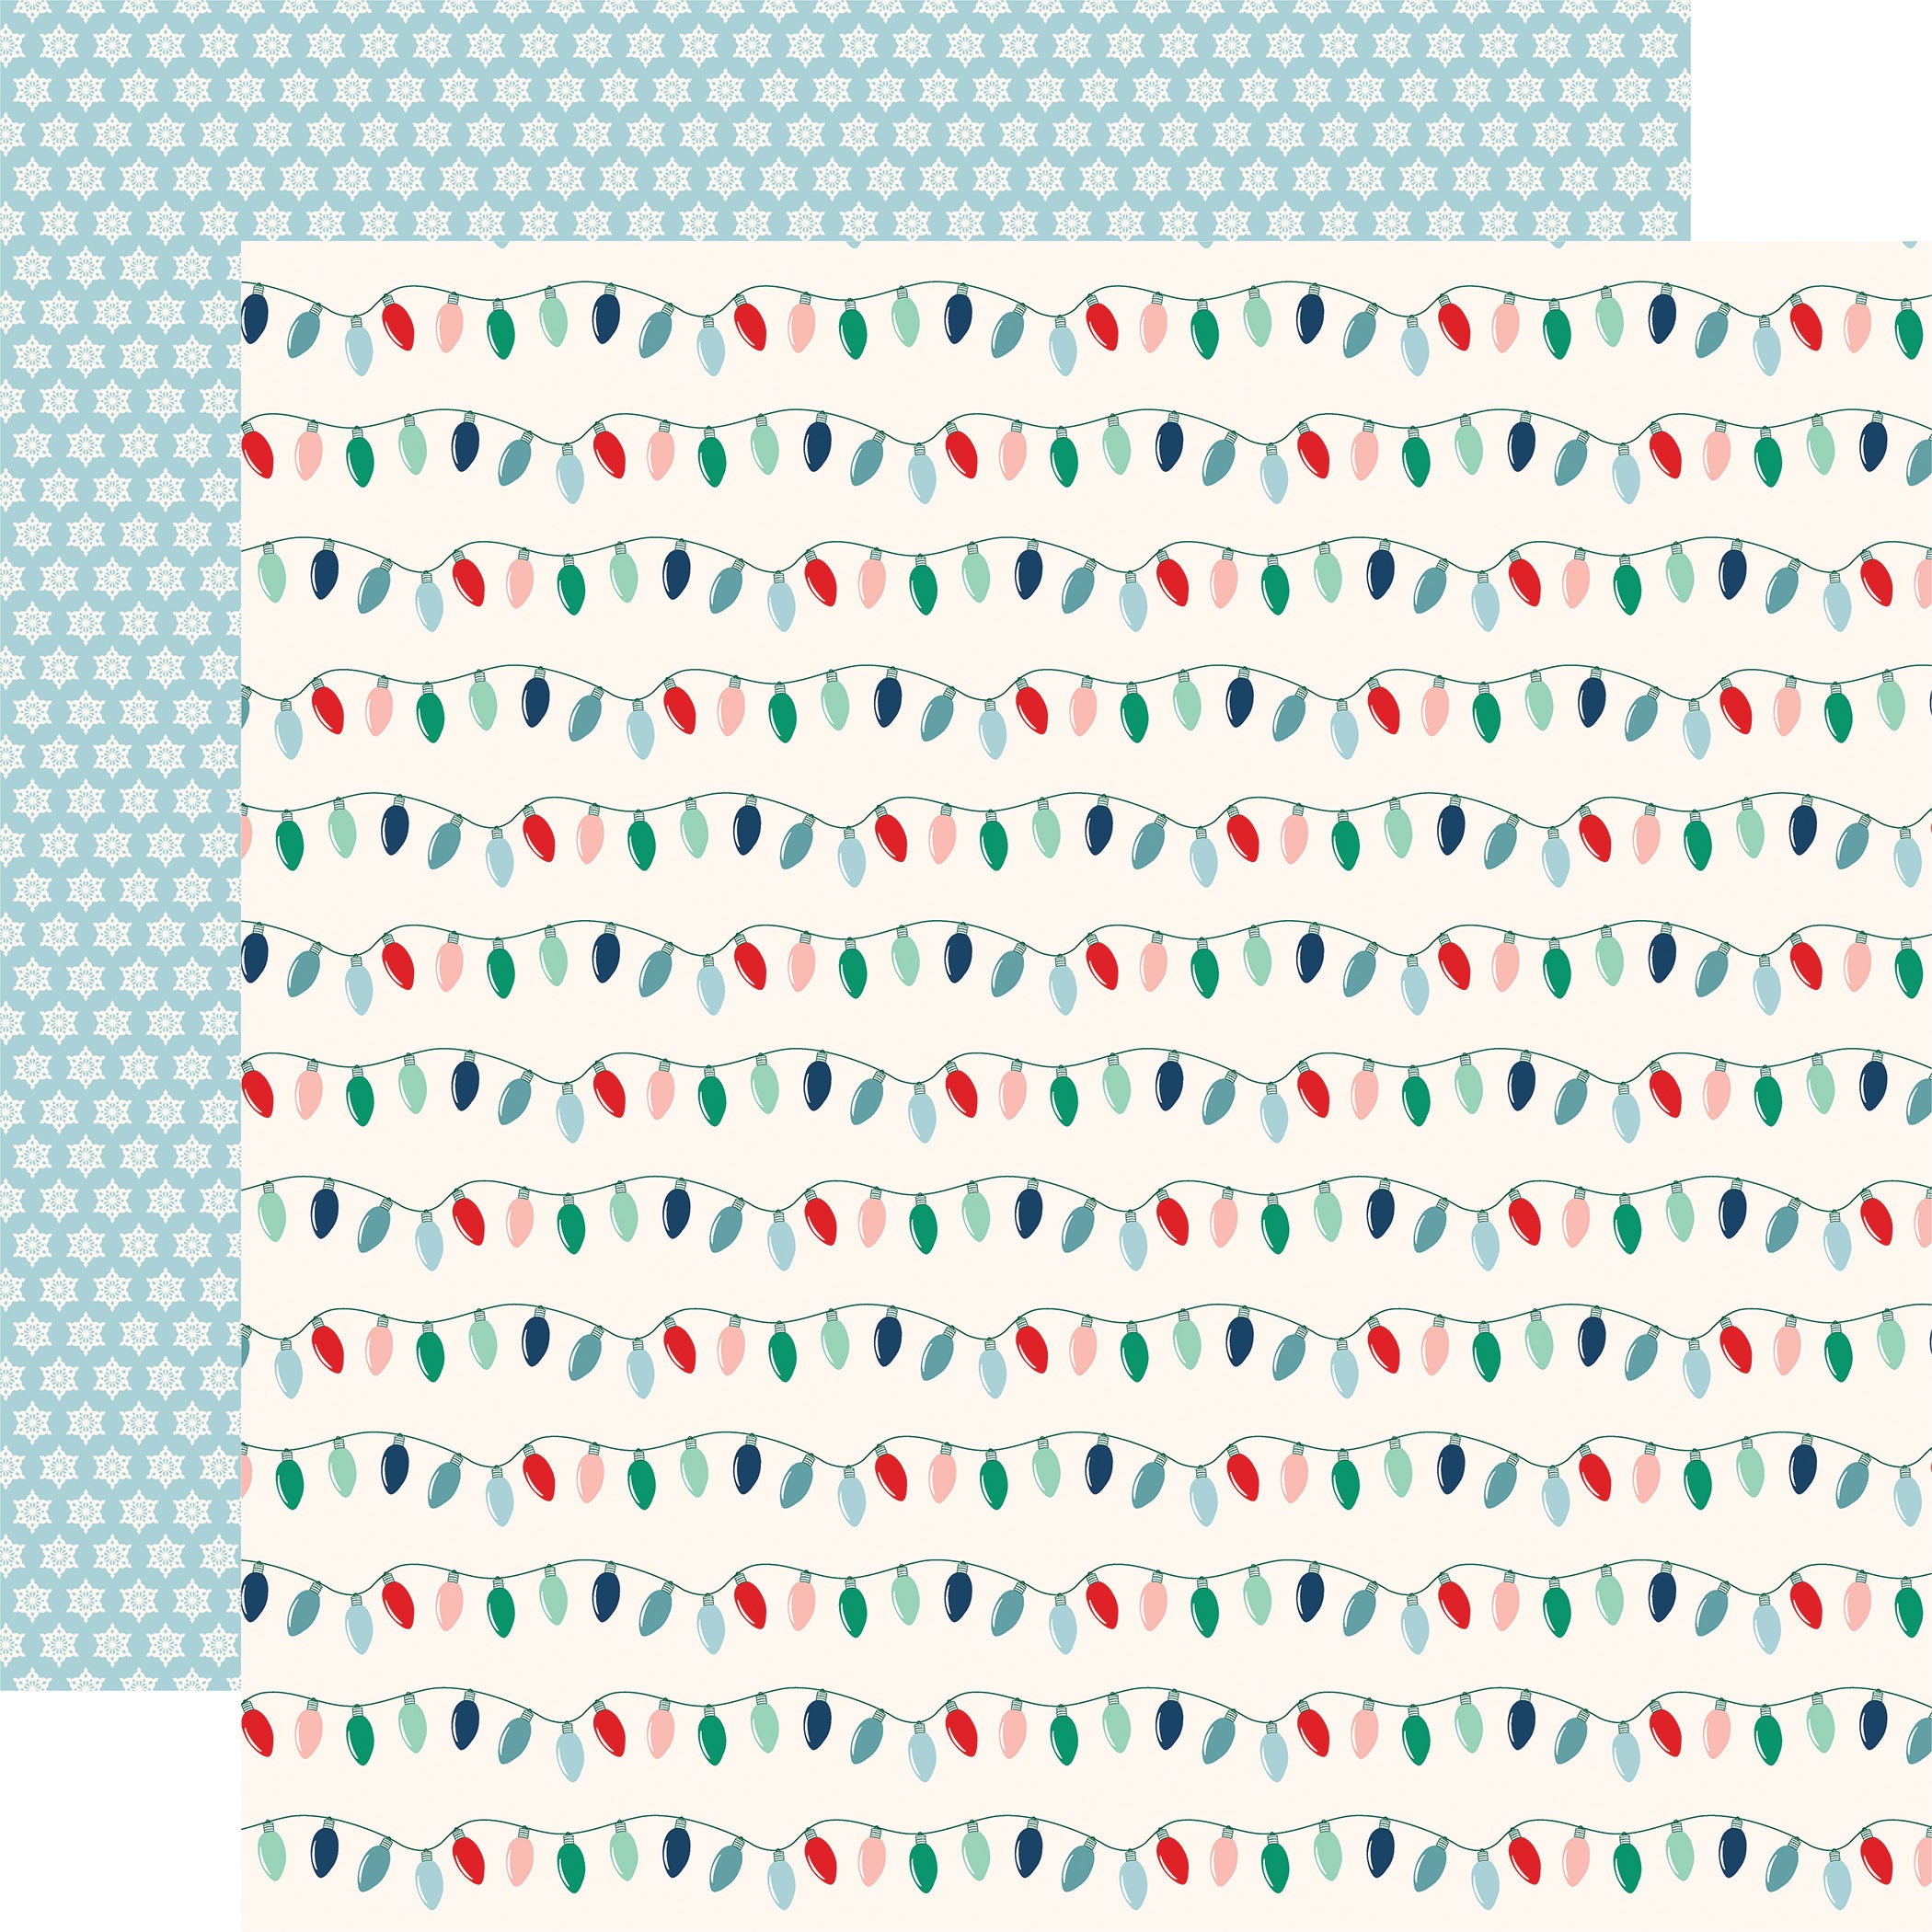 Happy Holidays Collection Festive Lights 12 x 12 Double-Sided Scrapbook Paper by Carta Bella